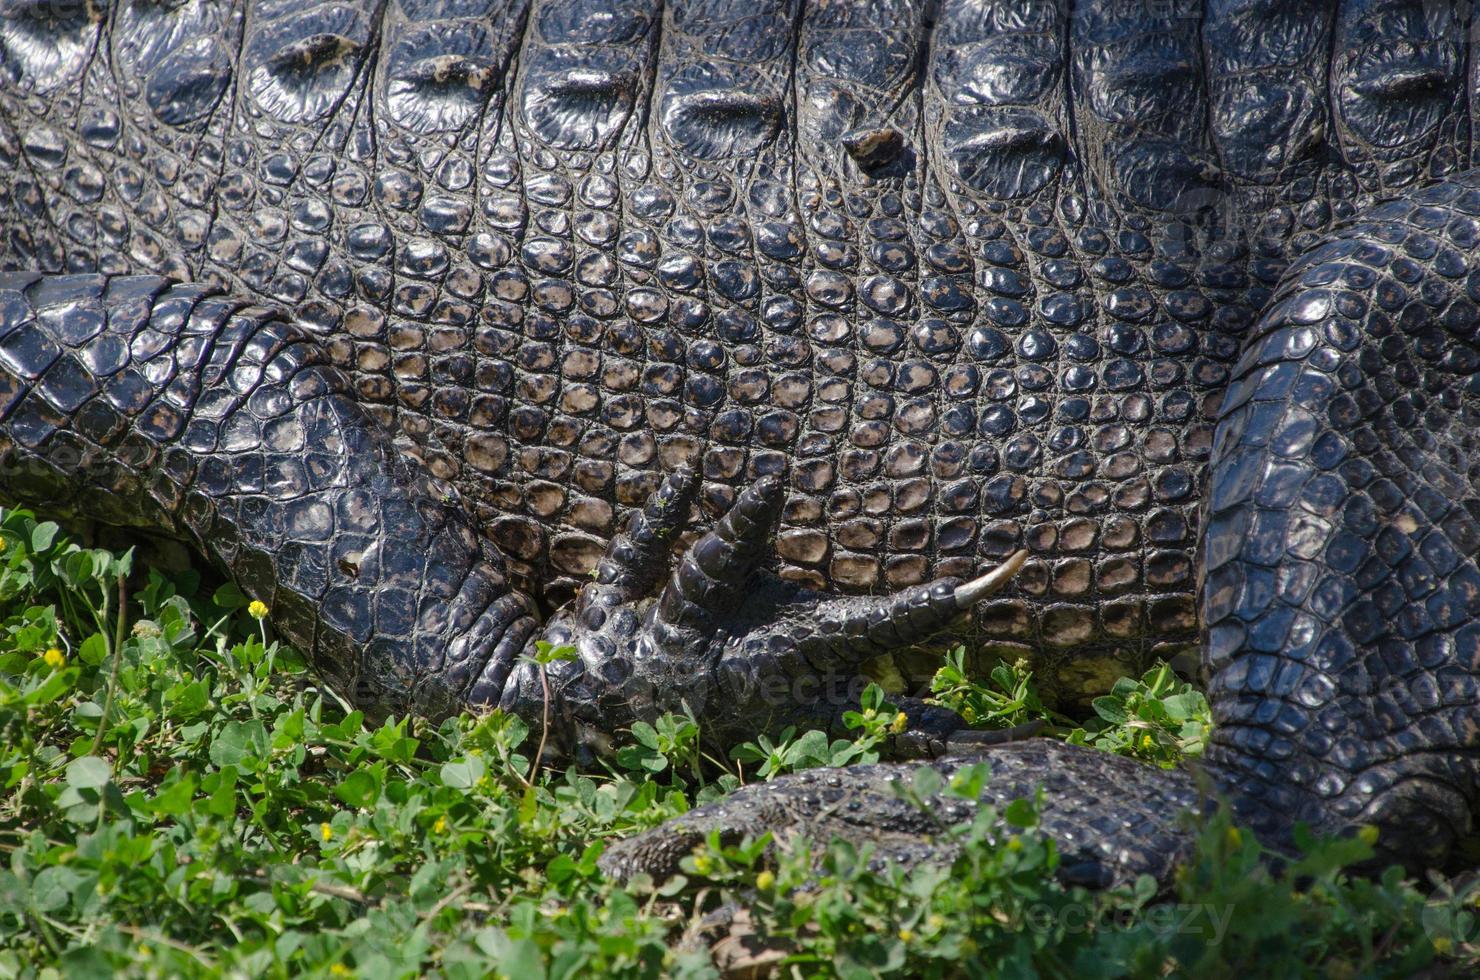 Close-up view of an alligator's midsection in profile, its limbs relaxed as it basks in the sun. photo